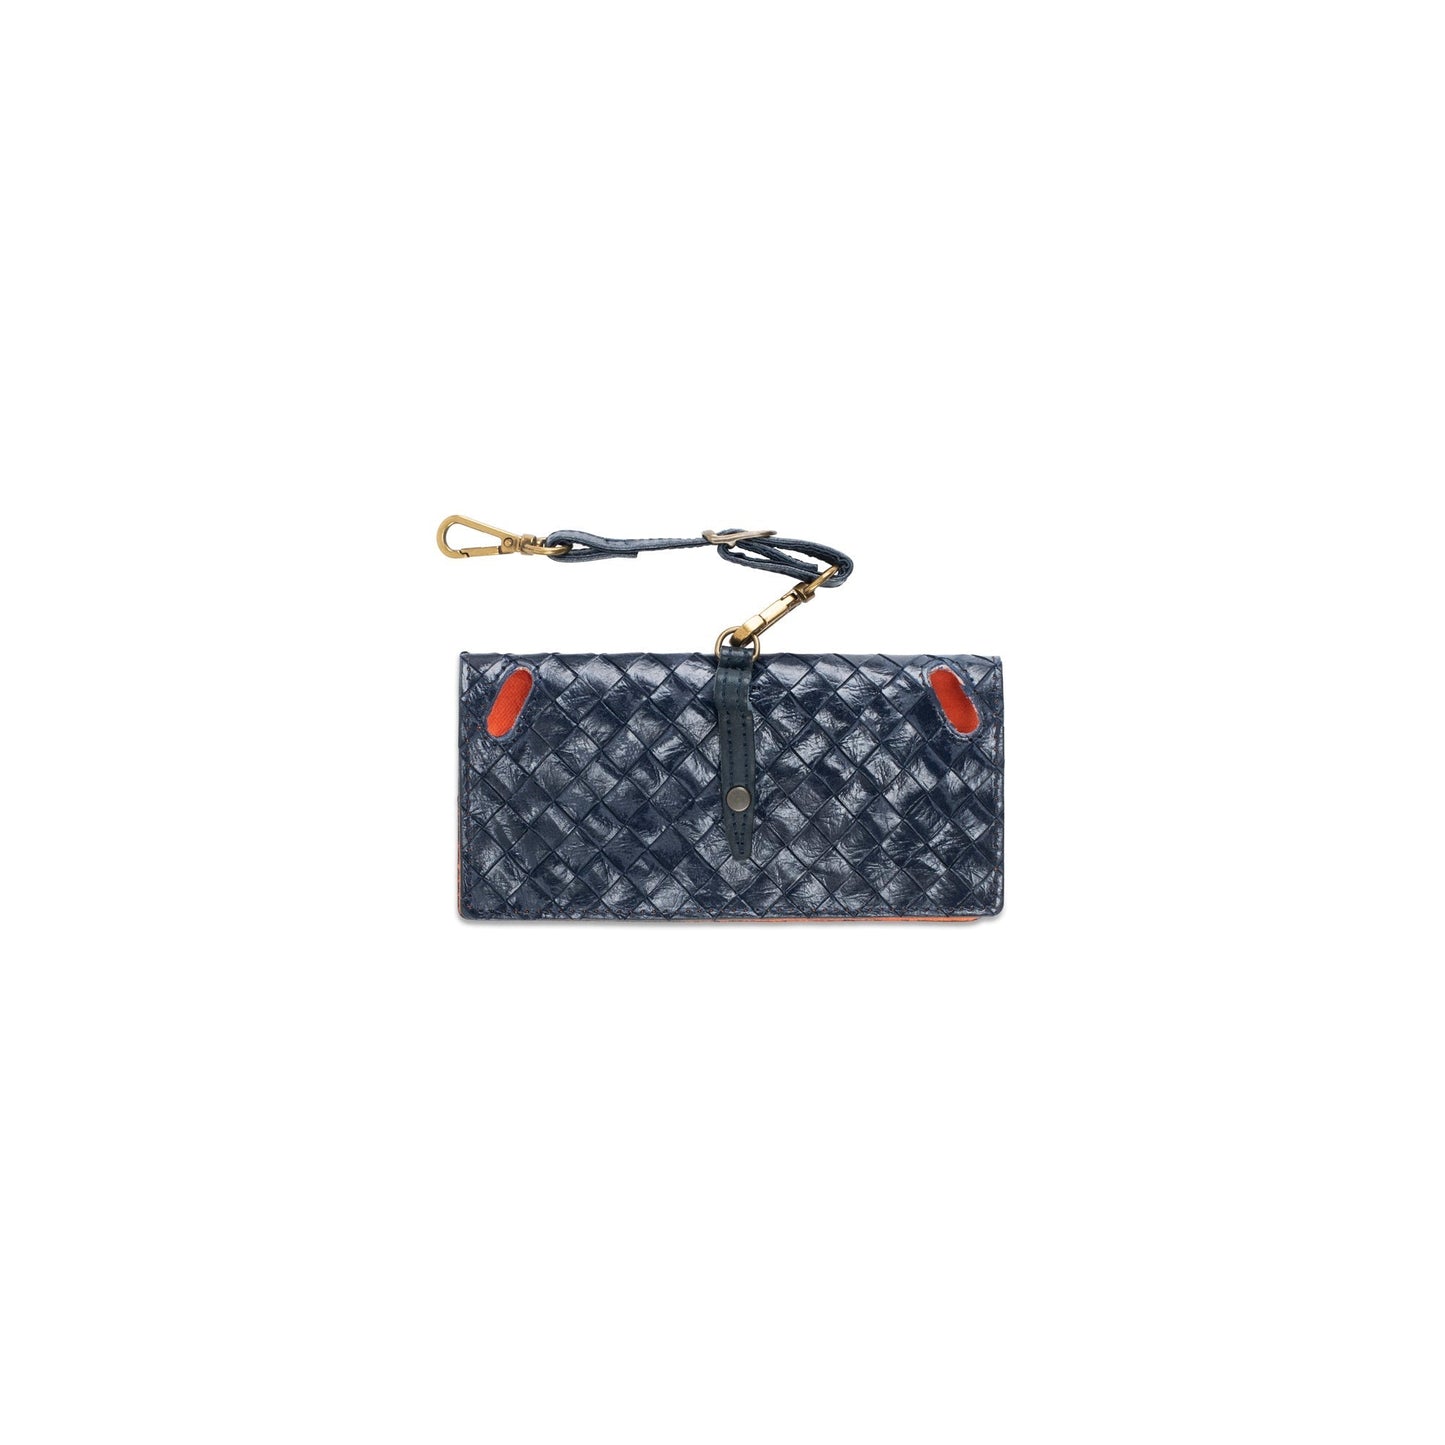 A navy woven washable paper glasses case is shown, with a metal stud closure and a washable paper strap attachment.